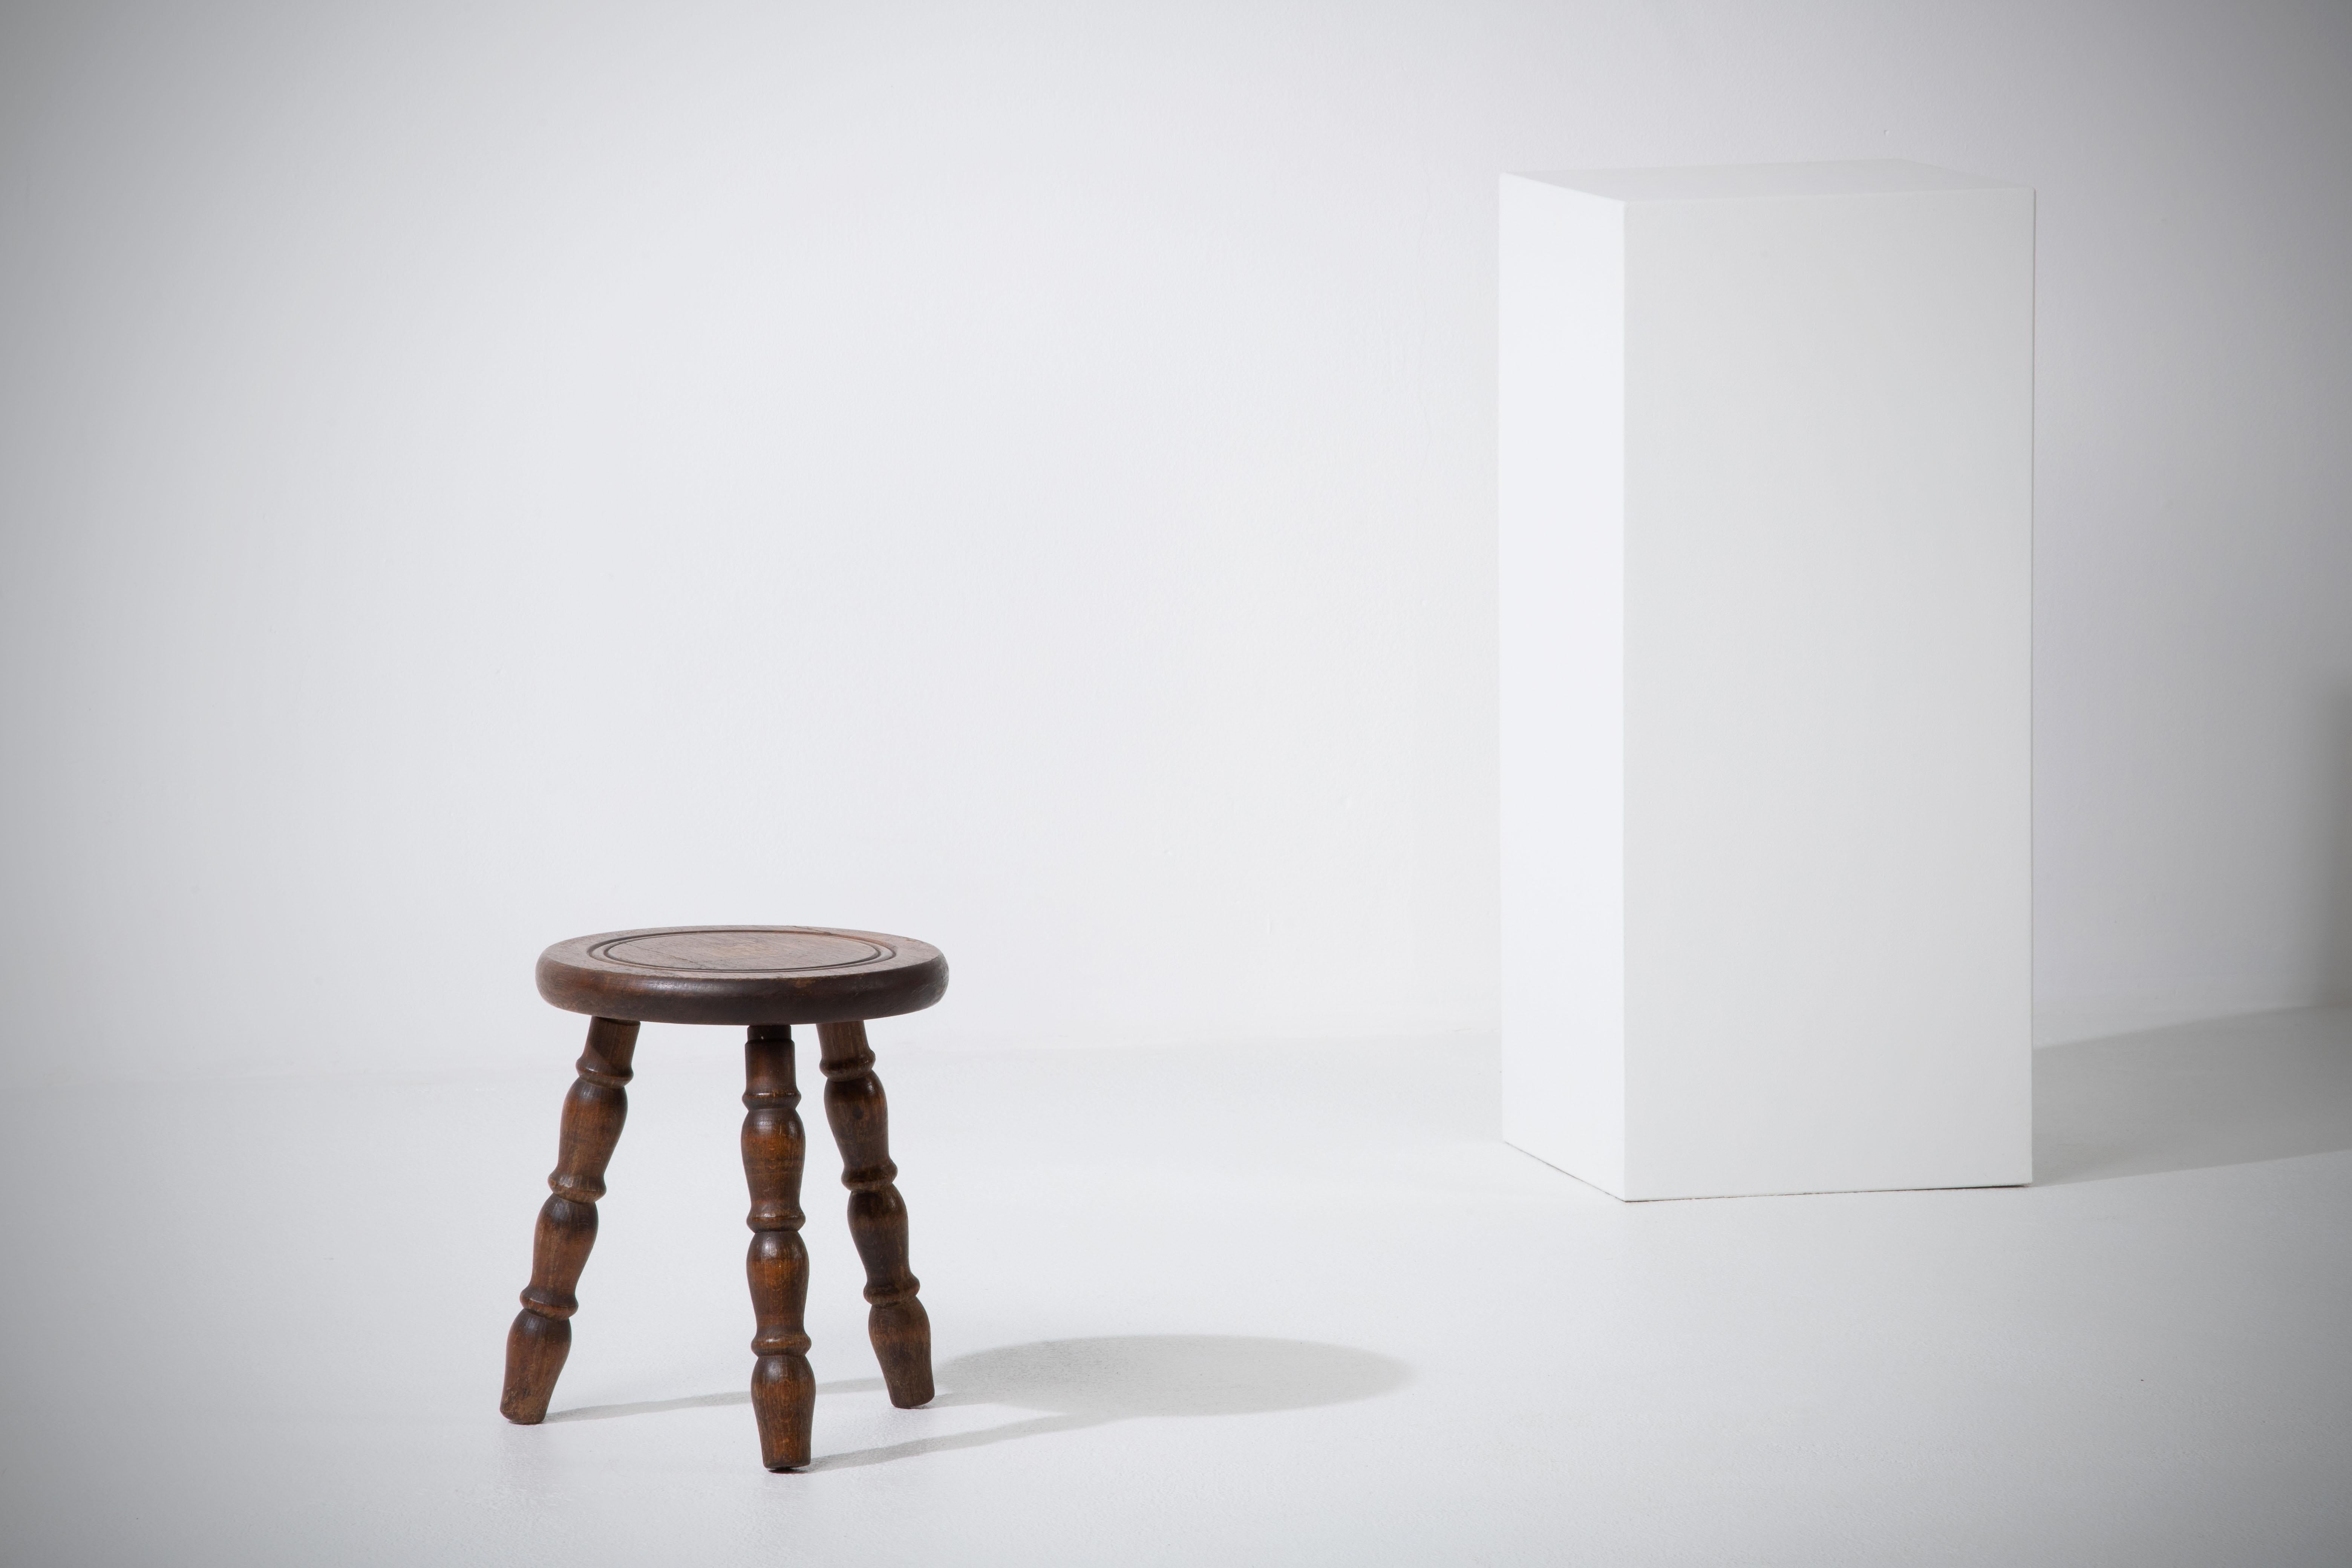 Introducing a fantastic midcentury wooden stool, crafted in France during the 1960s. This piece is constructed without the use of hardware, boasting an elegant round seat and gracefully legs, all made from rich oak wood.

The design is a